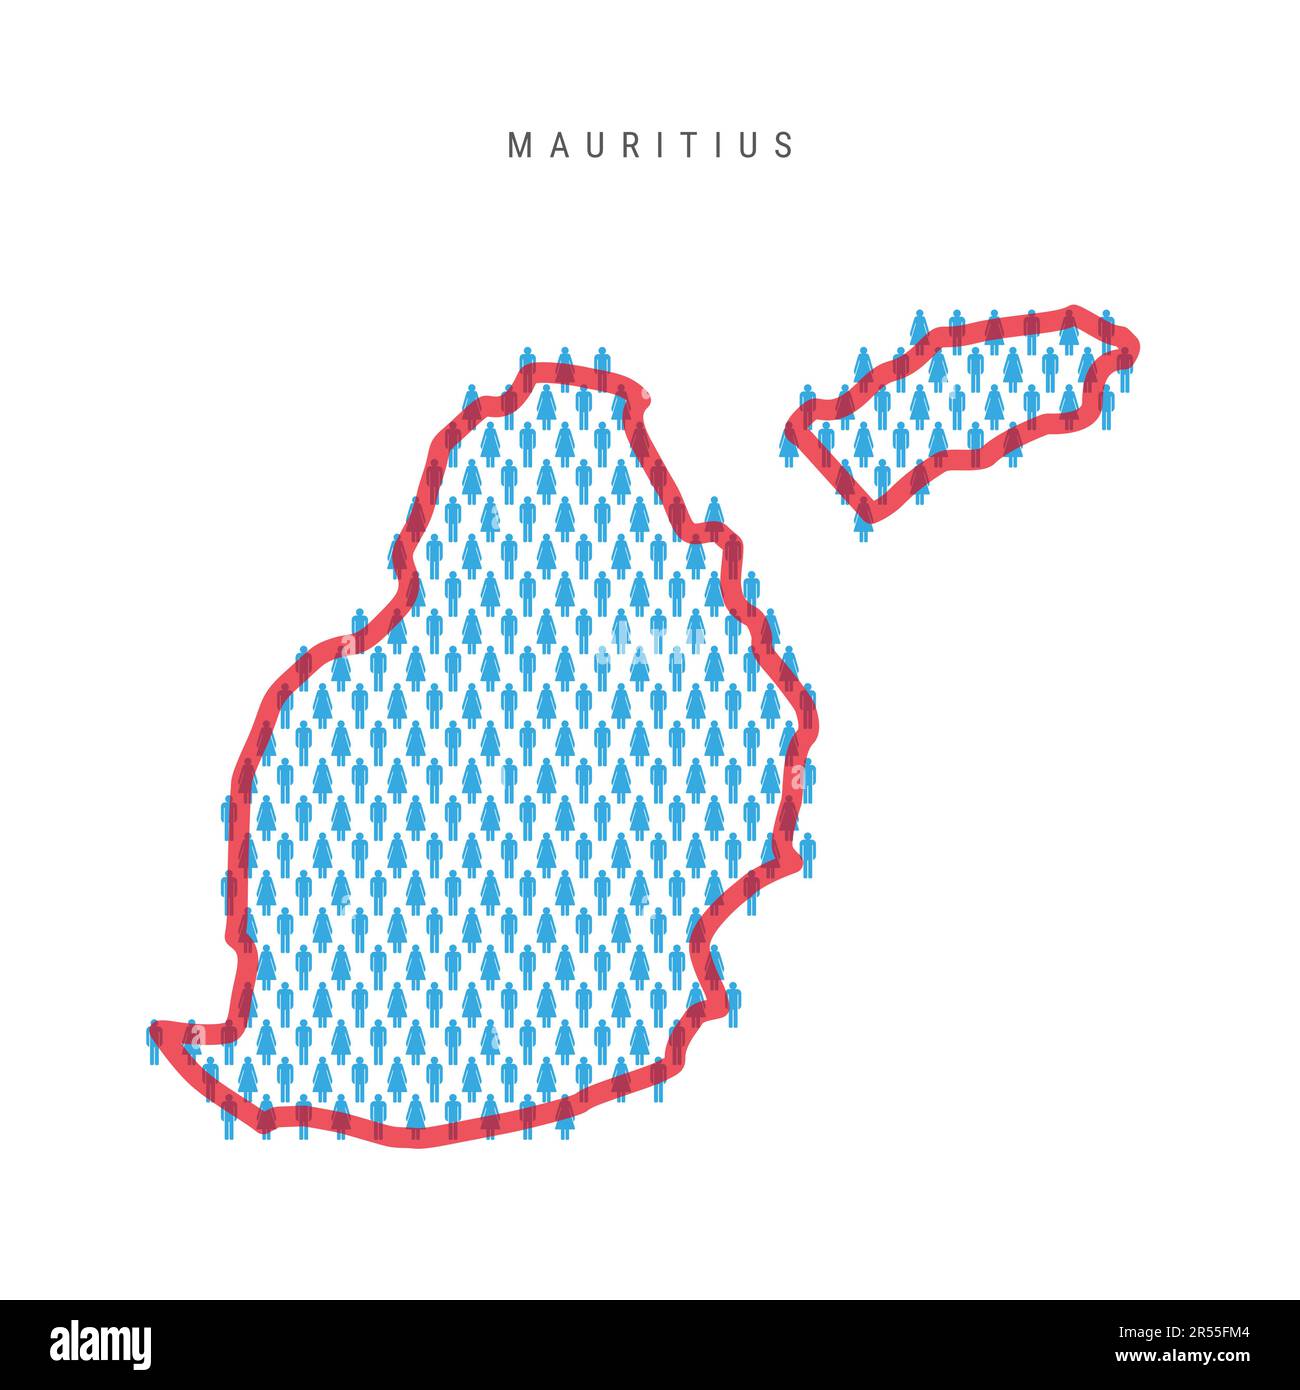 Mauritius population map. Stick figures Mauritian people map with bold red translucent country border. Pattern of men and women icons. Isolated vector Stock Vector